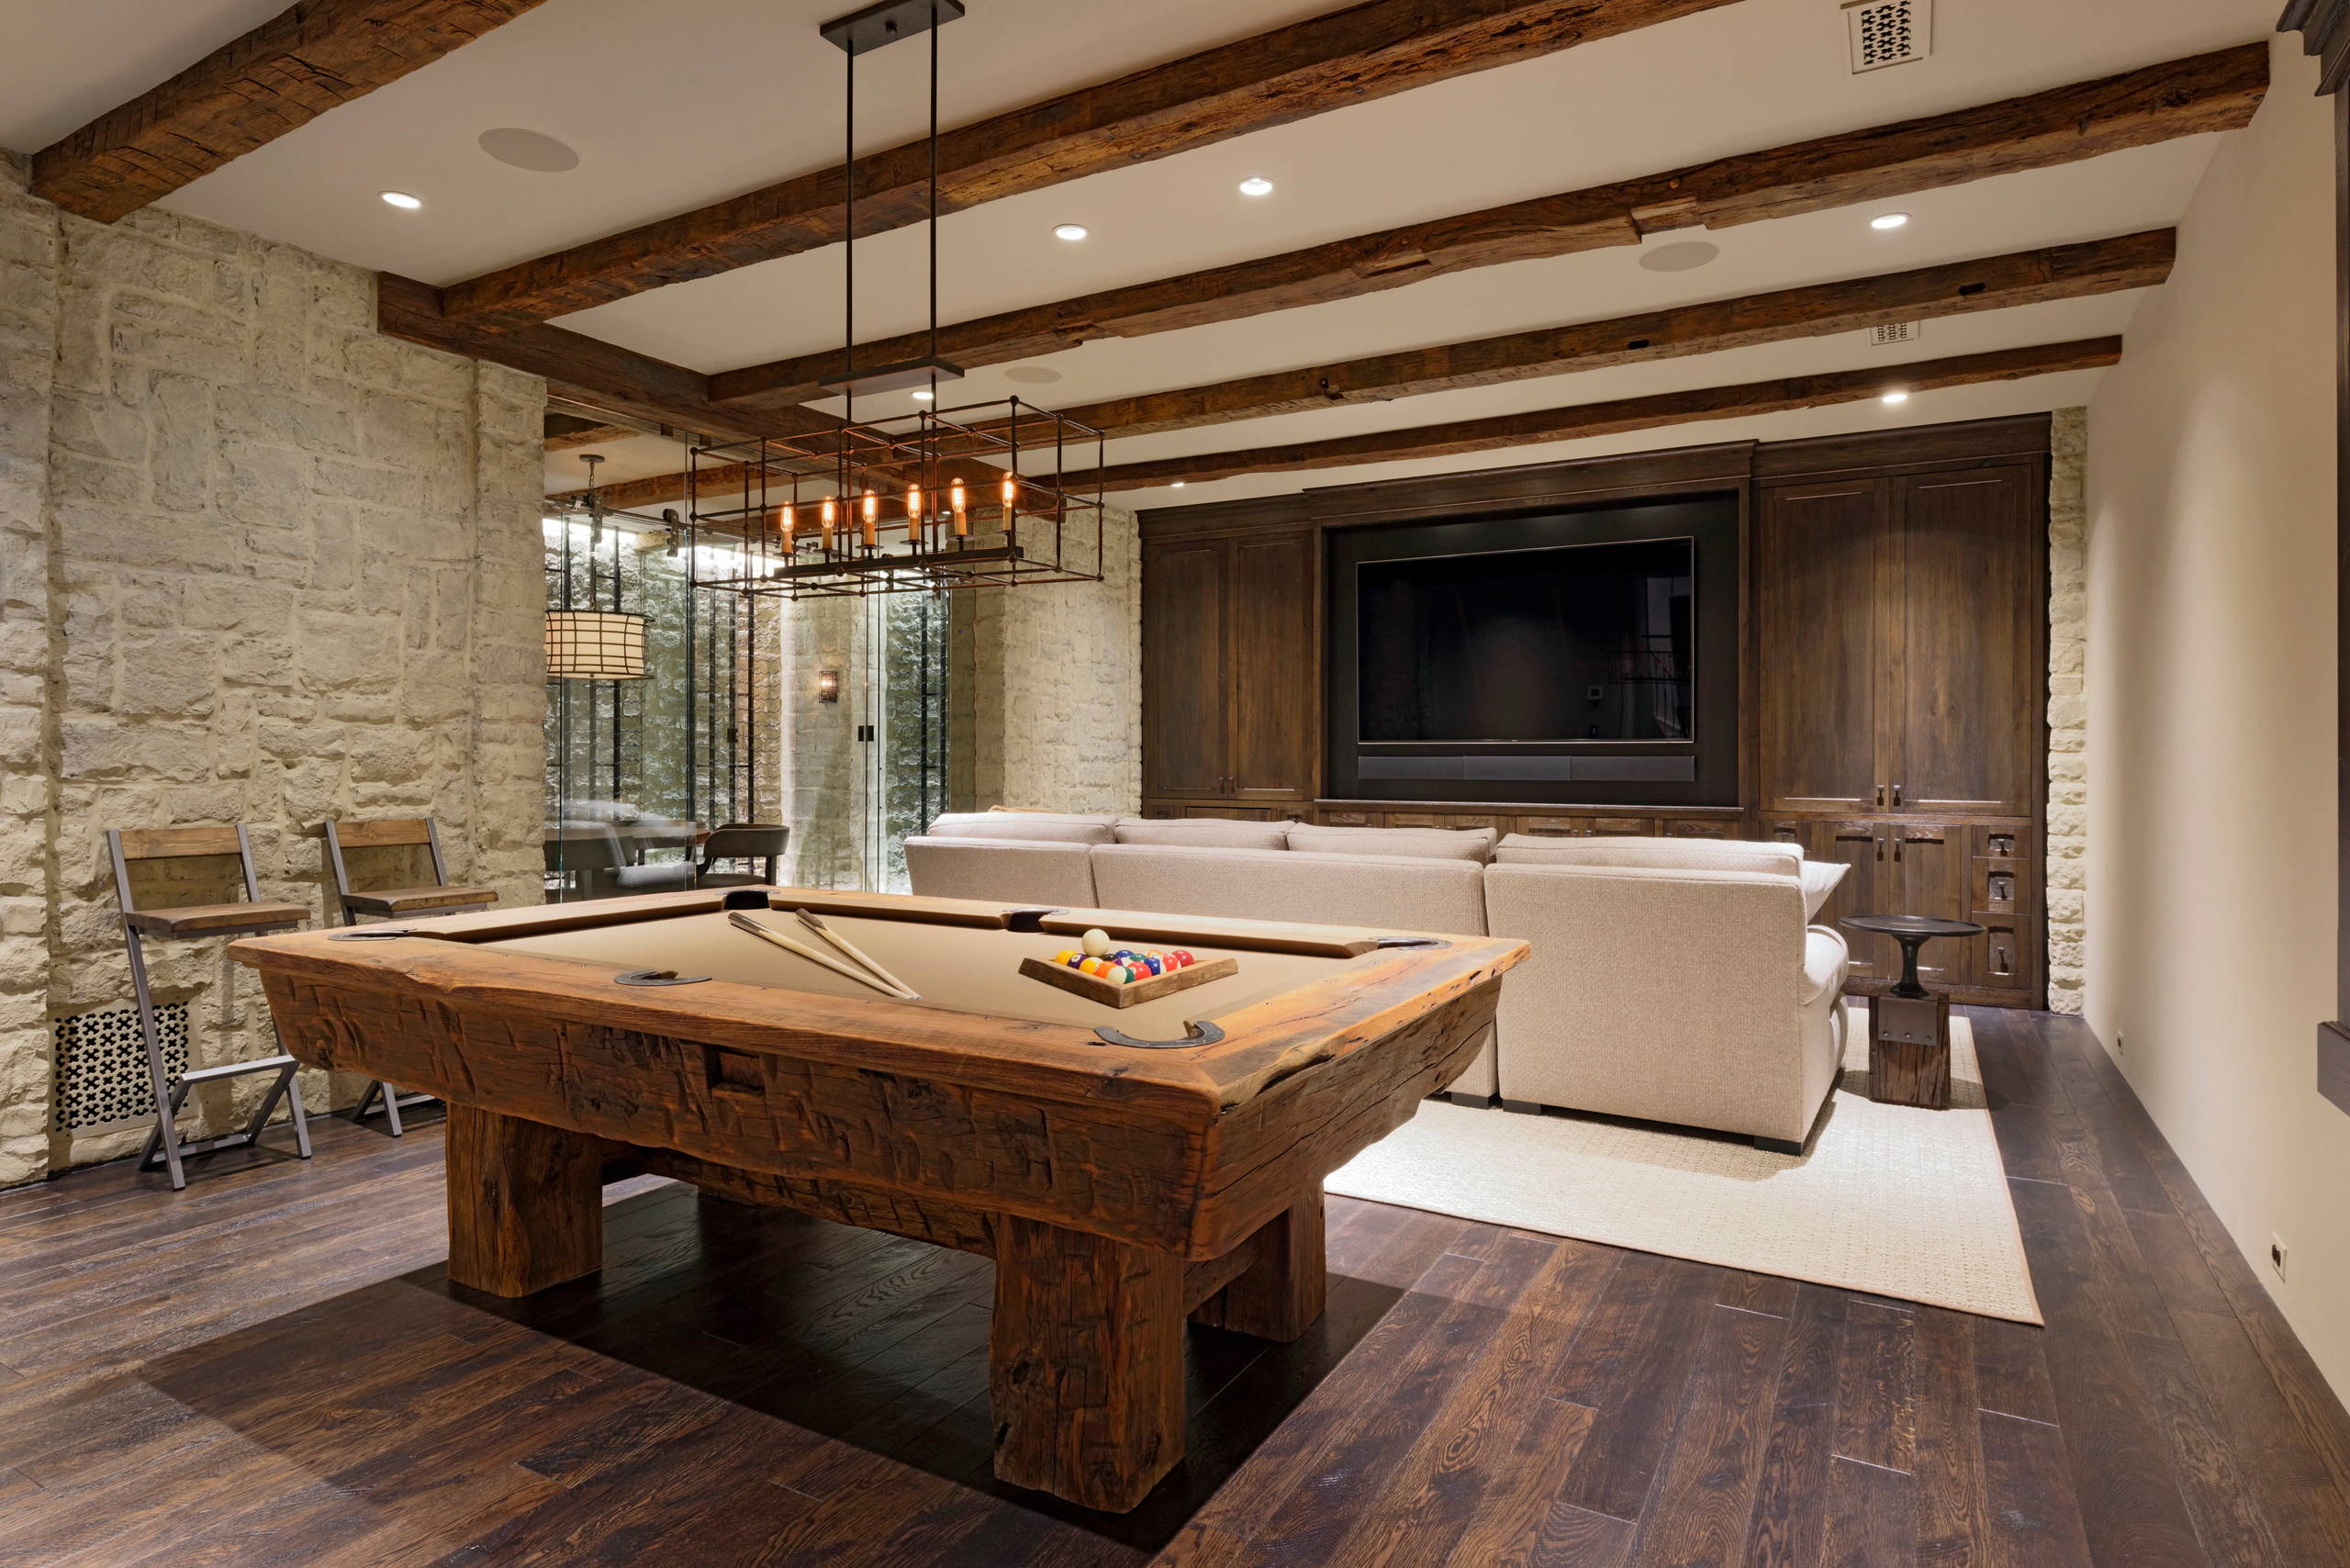 75 Beautiful Basement Game Room Pictures Ideas February 2021 Houzz